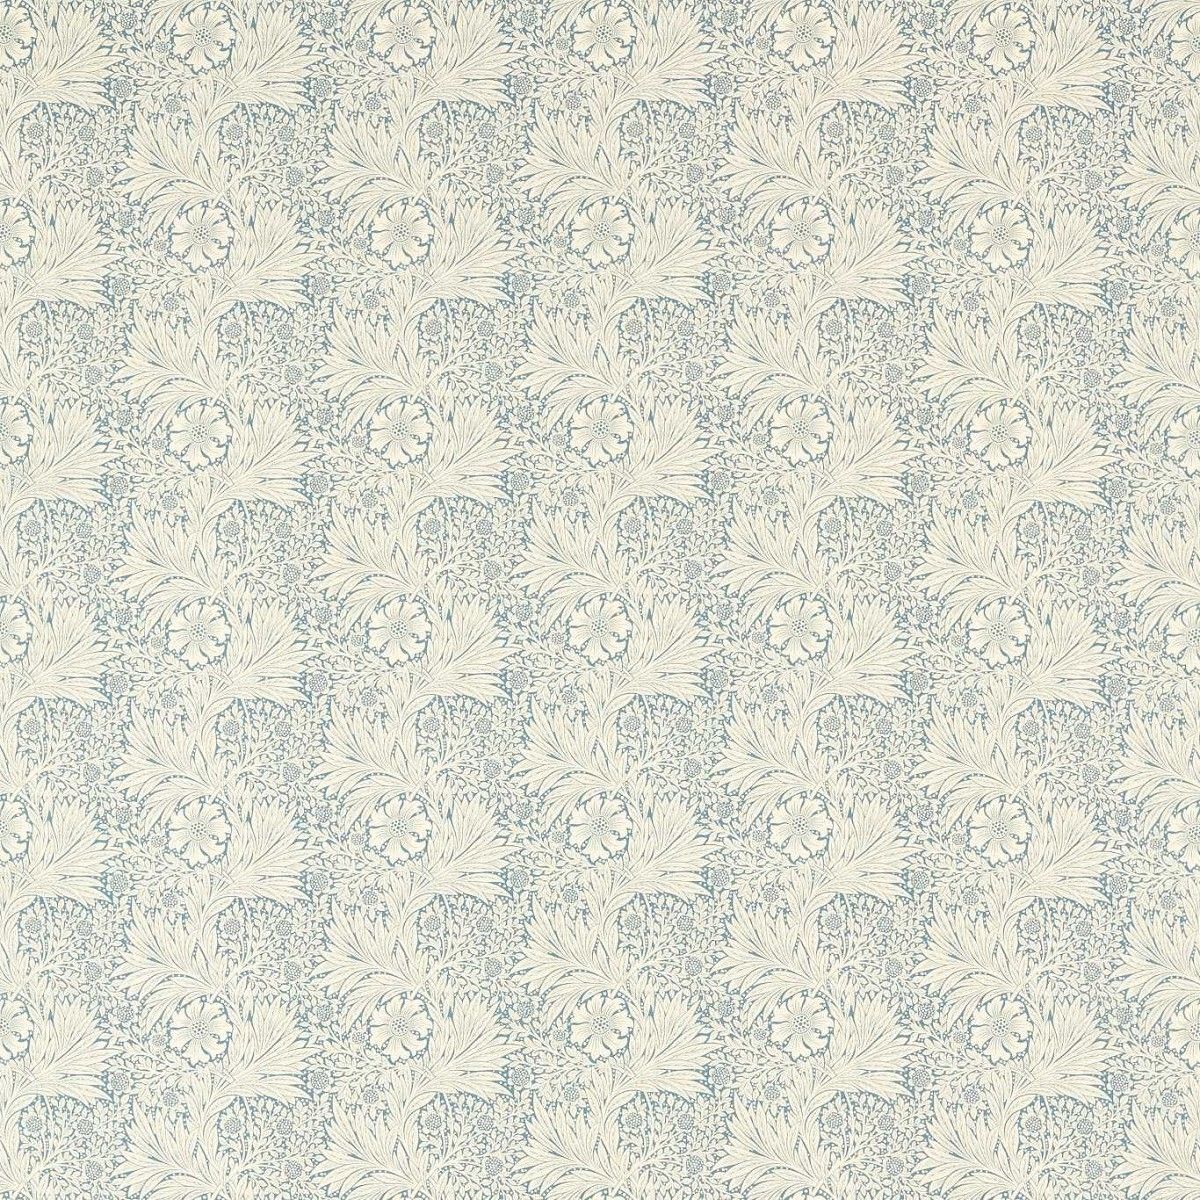 Marigold Outdoor Mineral Blue Fabric by William Morris & Co.